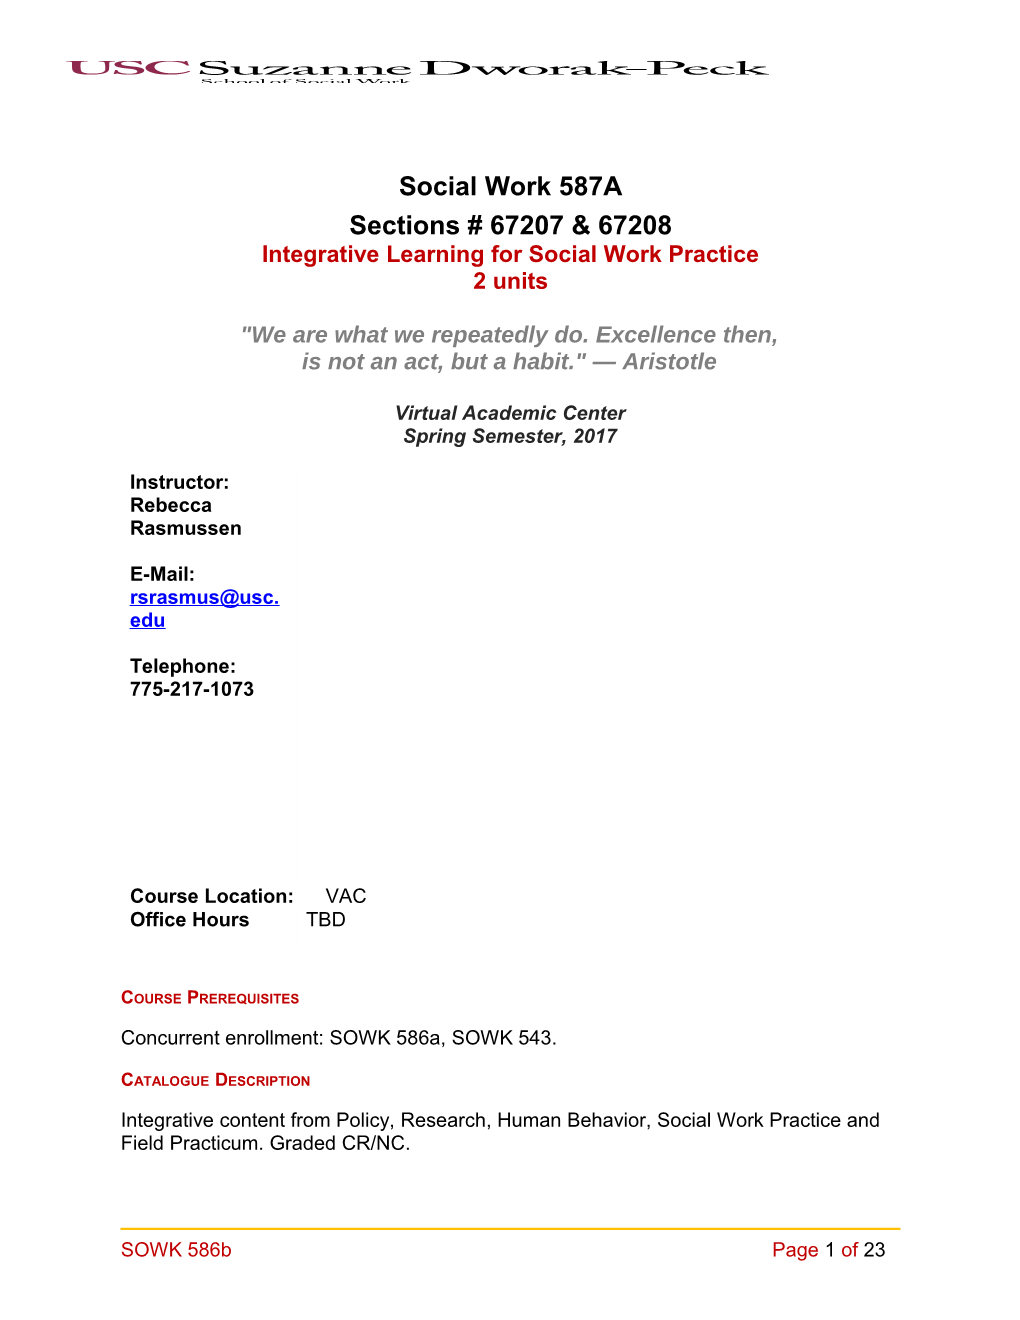 School of Social Work Syllabus Template Guide s8